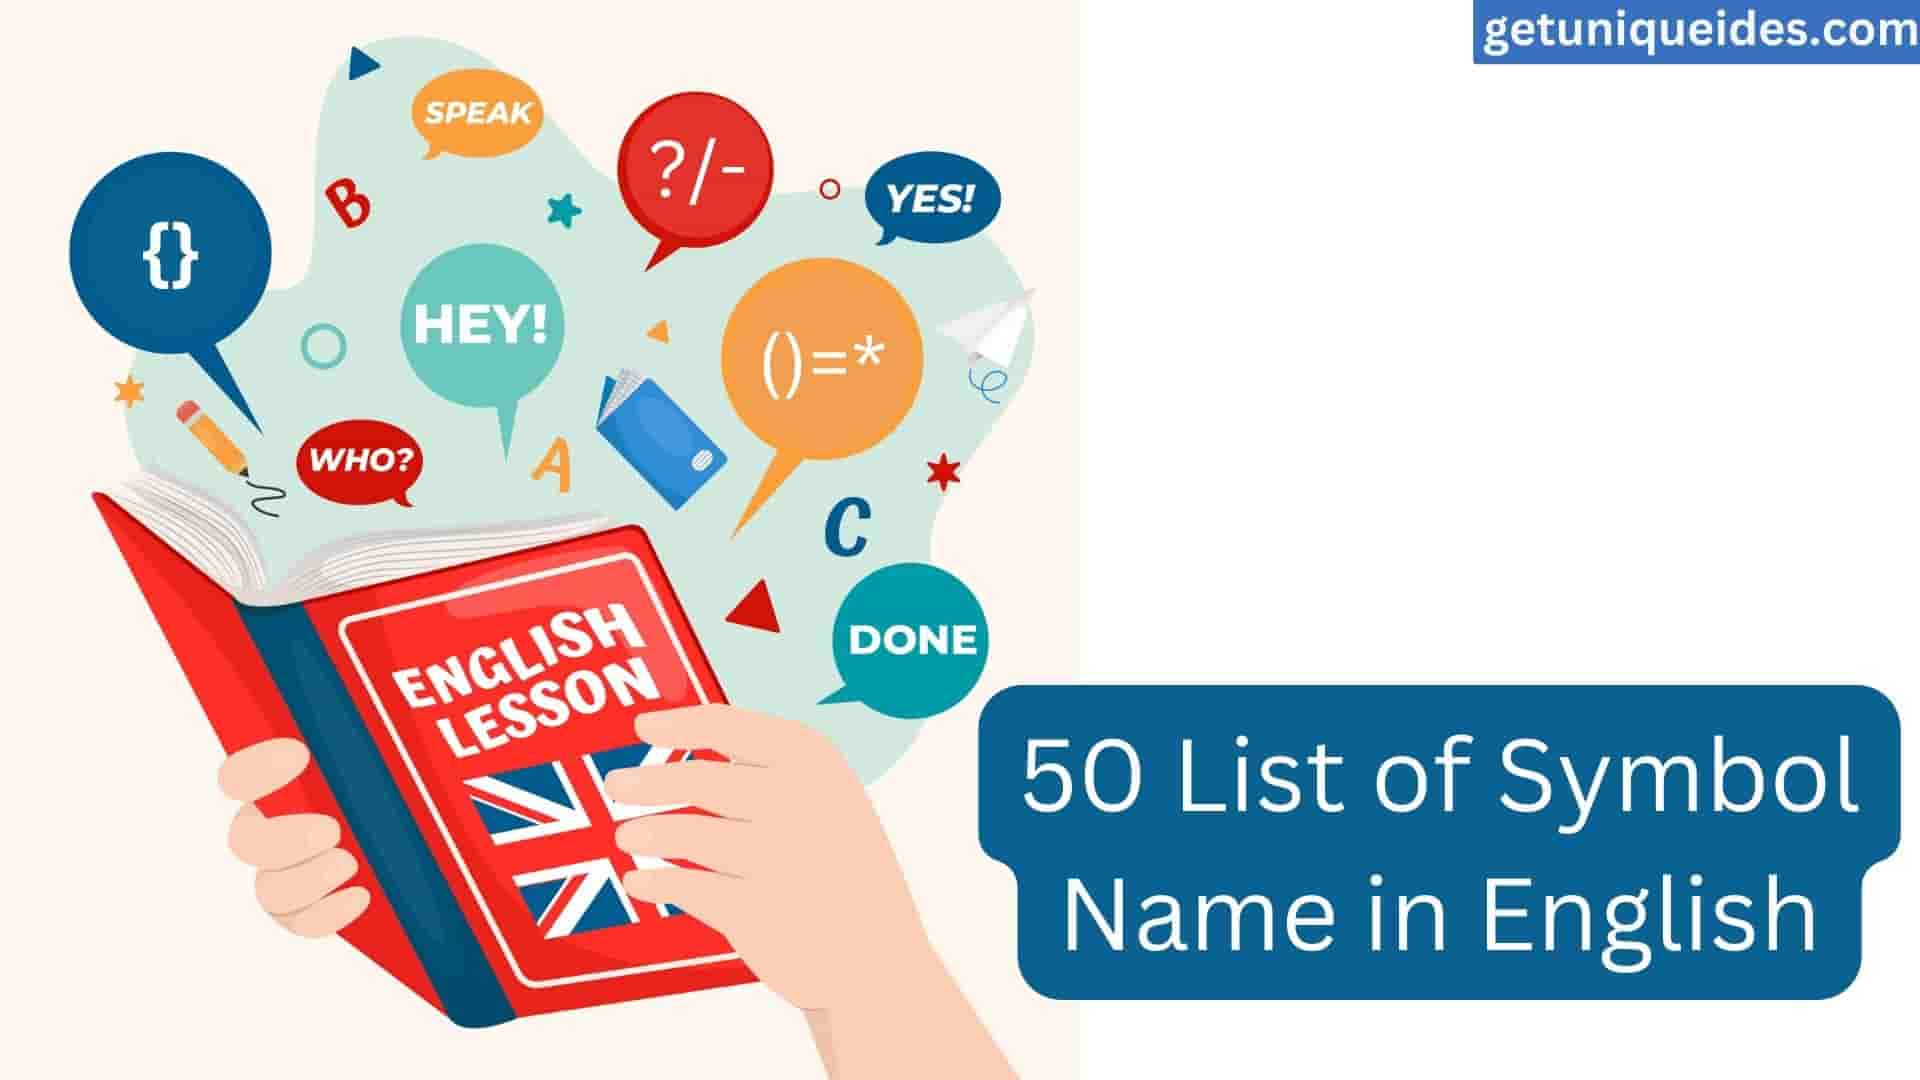 50 List of Symbol Name in English